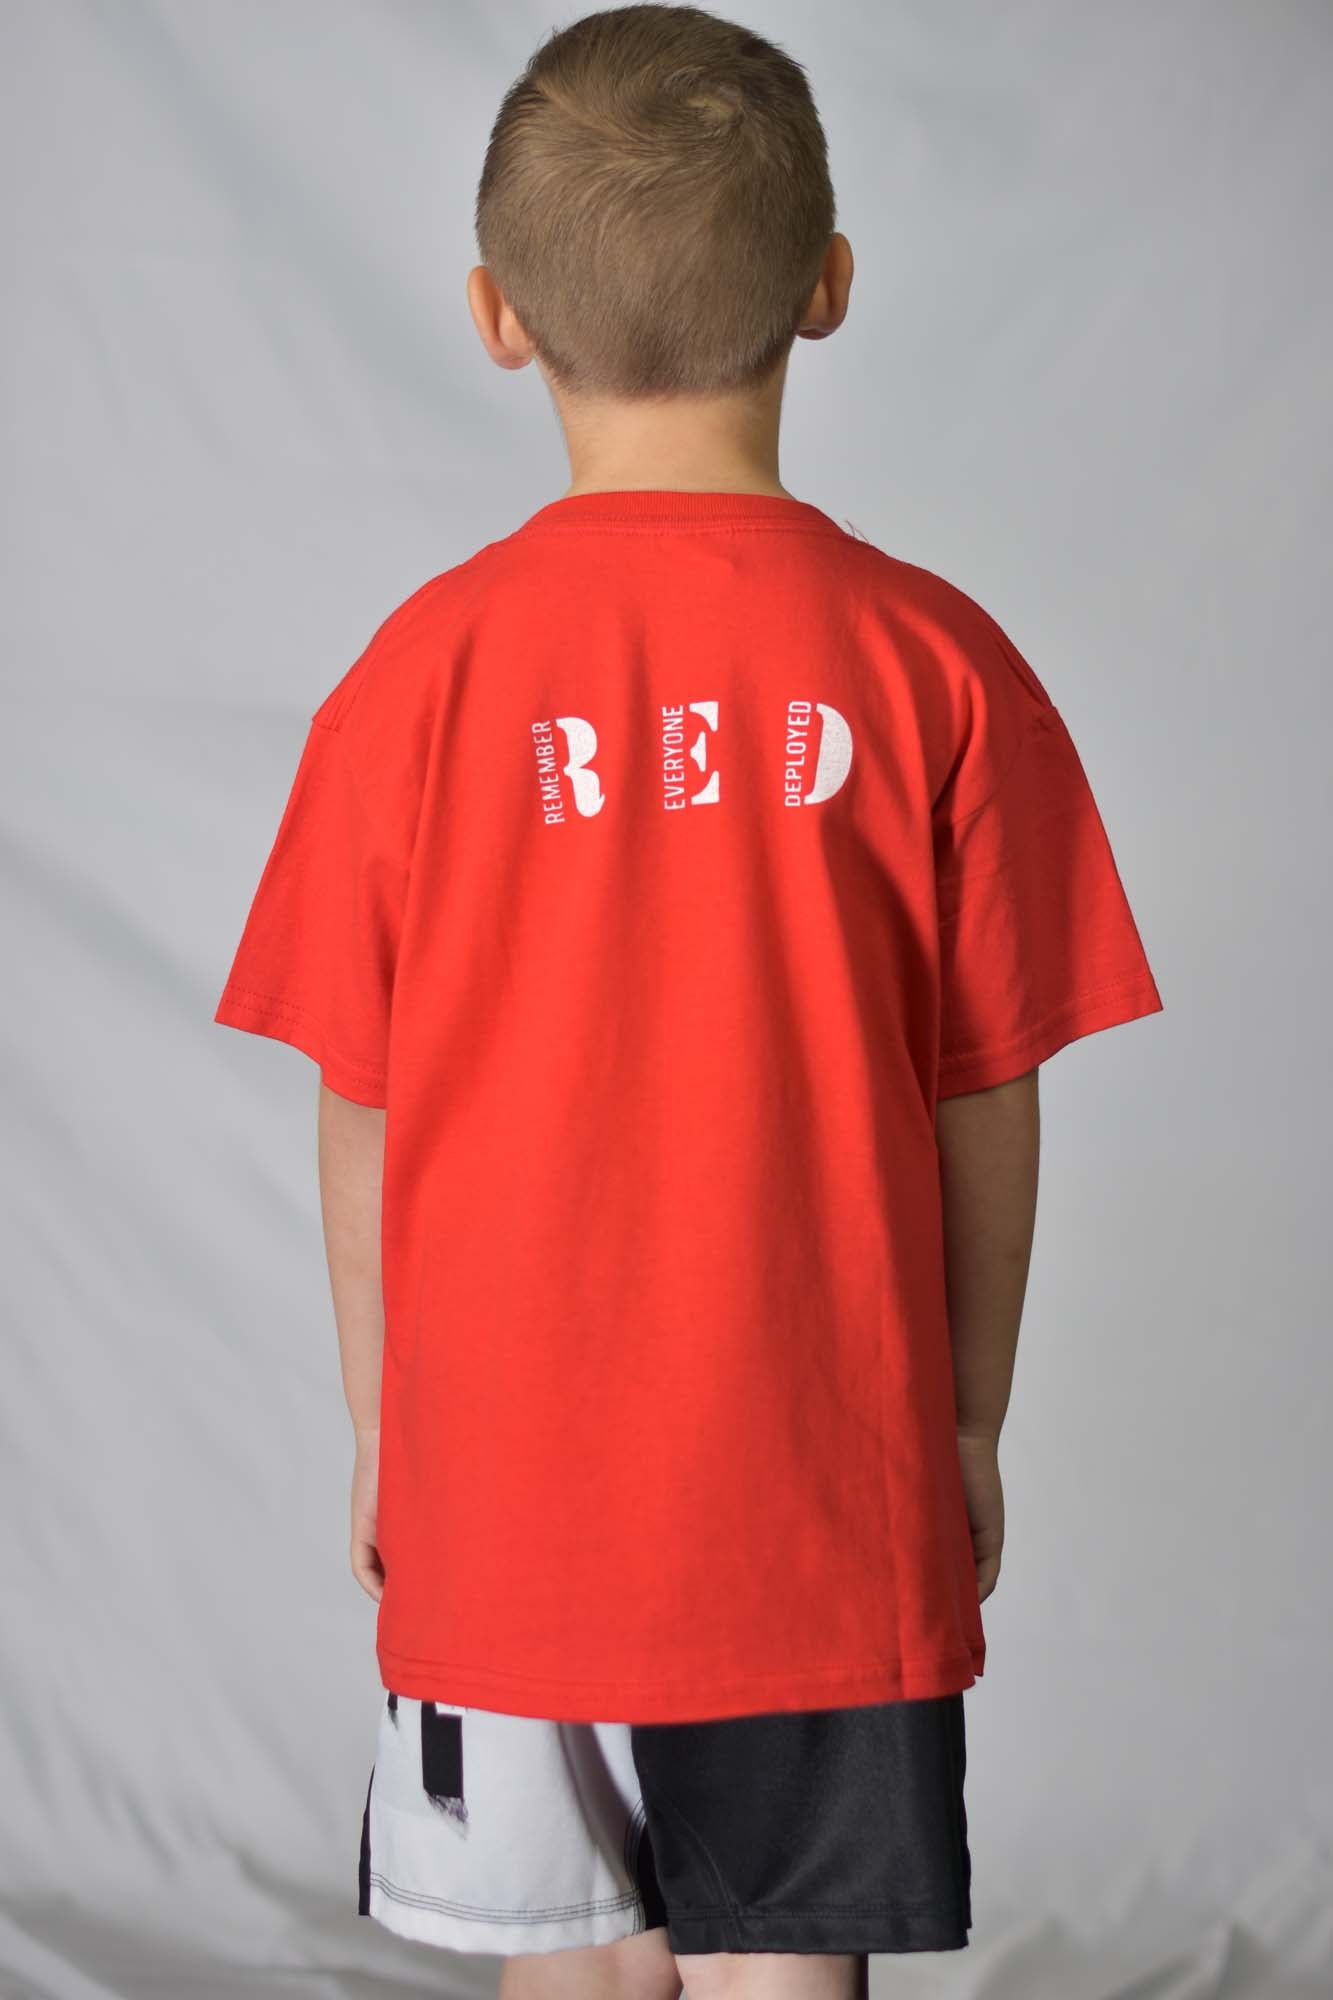 Top Mount Apparel American Flag RED Friday Kids Tee